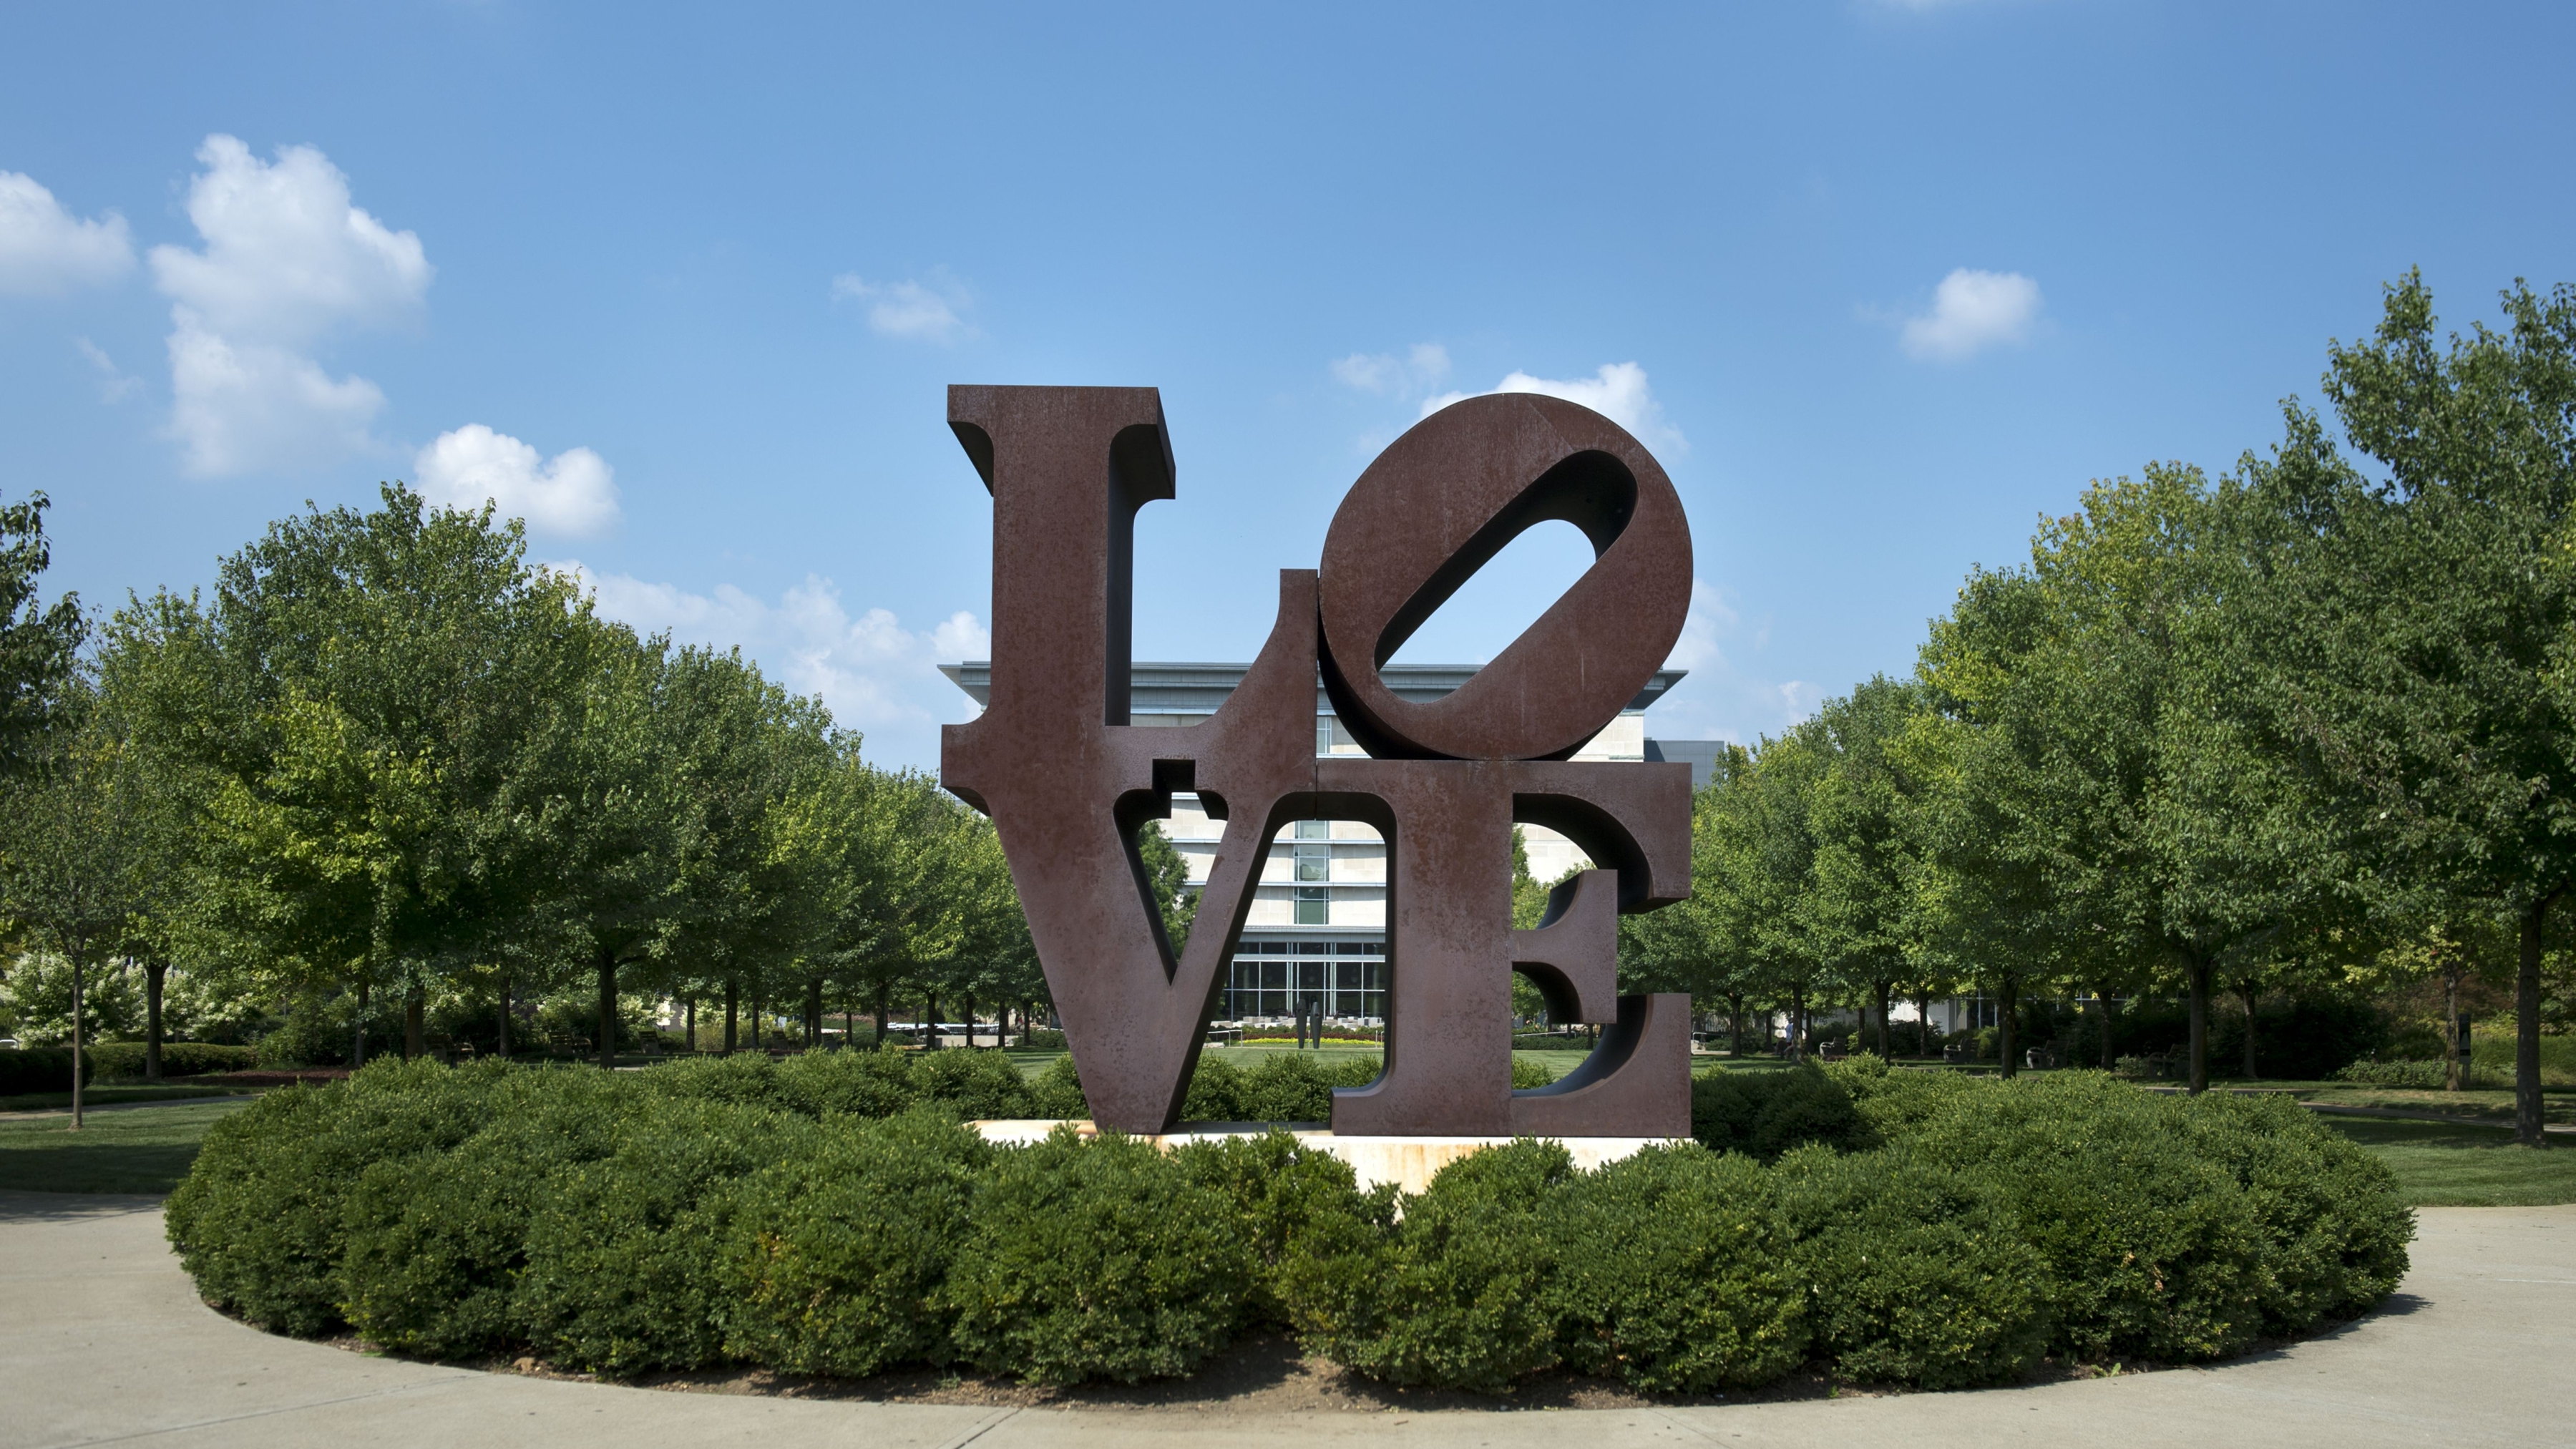 Installation view of&amp;nbsp;LOVE,&amp;nbsp;1970,&amp;nbsp;Cor-Ten steel, 144 x 144 x 72 in. (365.8 x 365.8 x 182.9 cm) at the Indianapolis Museum of Art at Newfields, Indiana. Gift of the Friends of the IMA in memory of Henry F. DeBoest (1970) (IMA75.174)